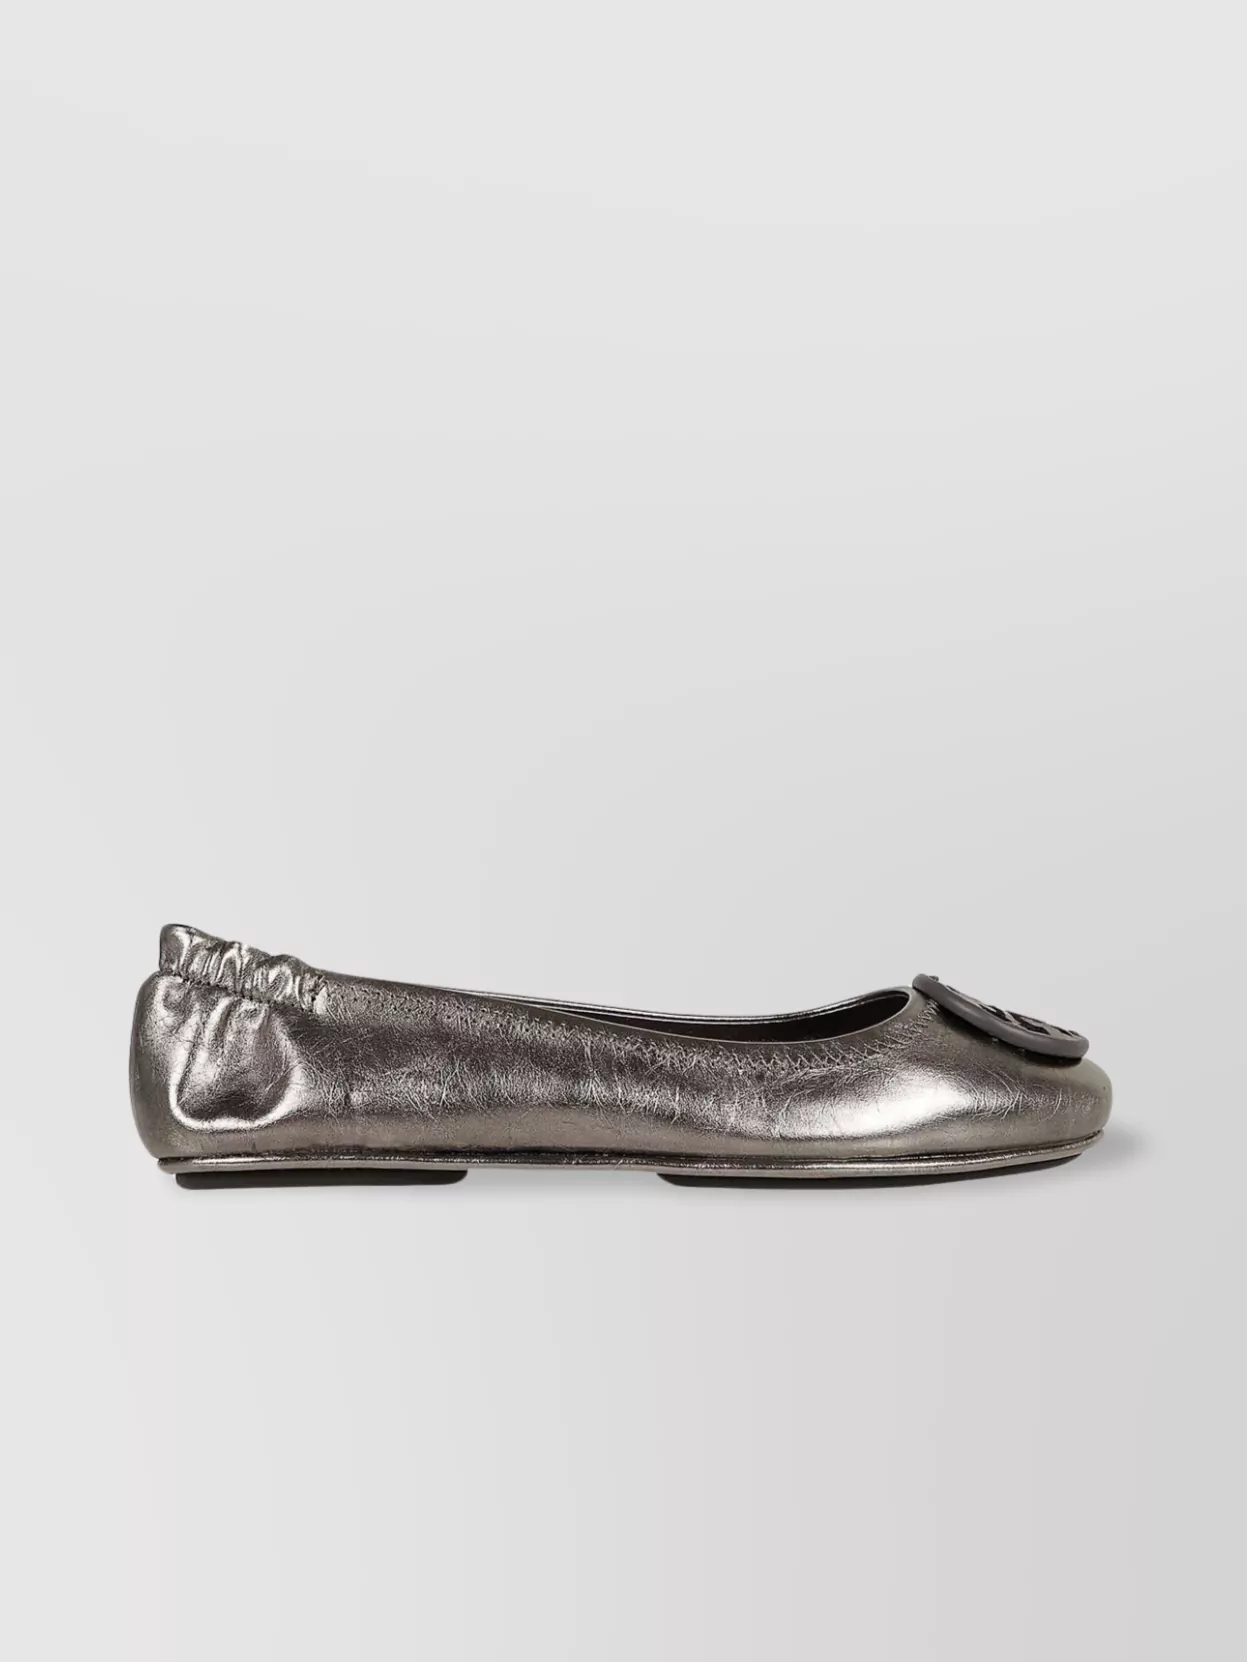 TORY BURCH BALLET FLATS WITH METALLIC SHINE AND BOW